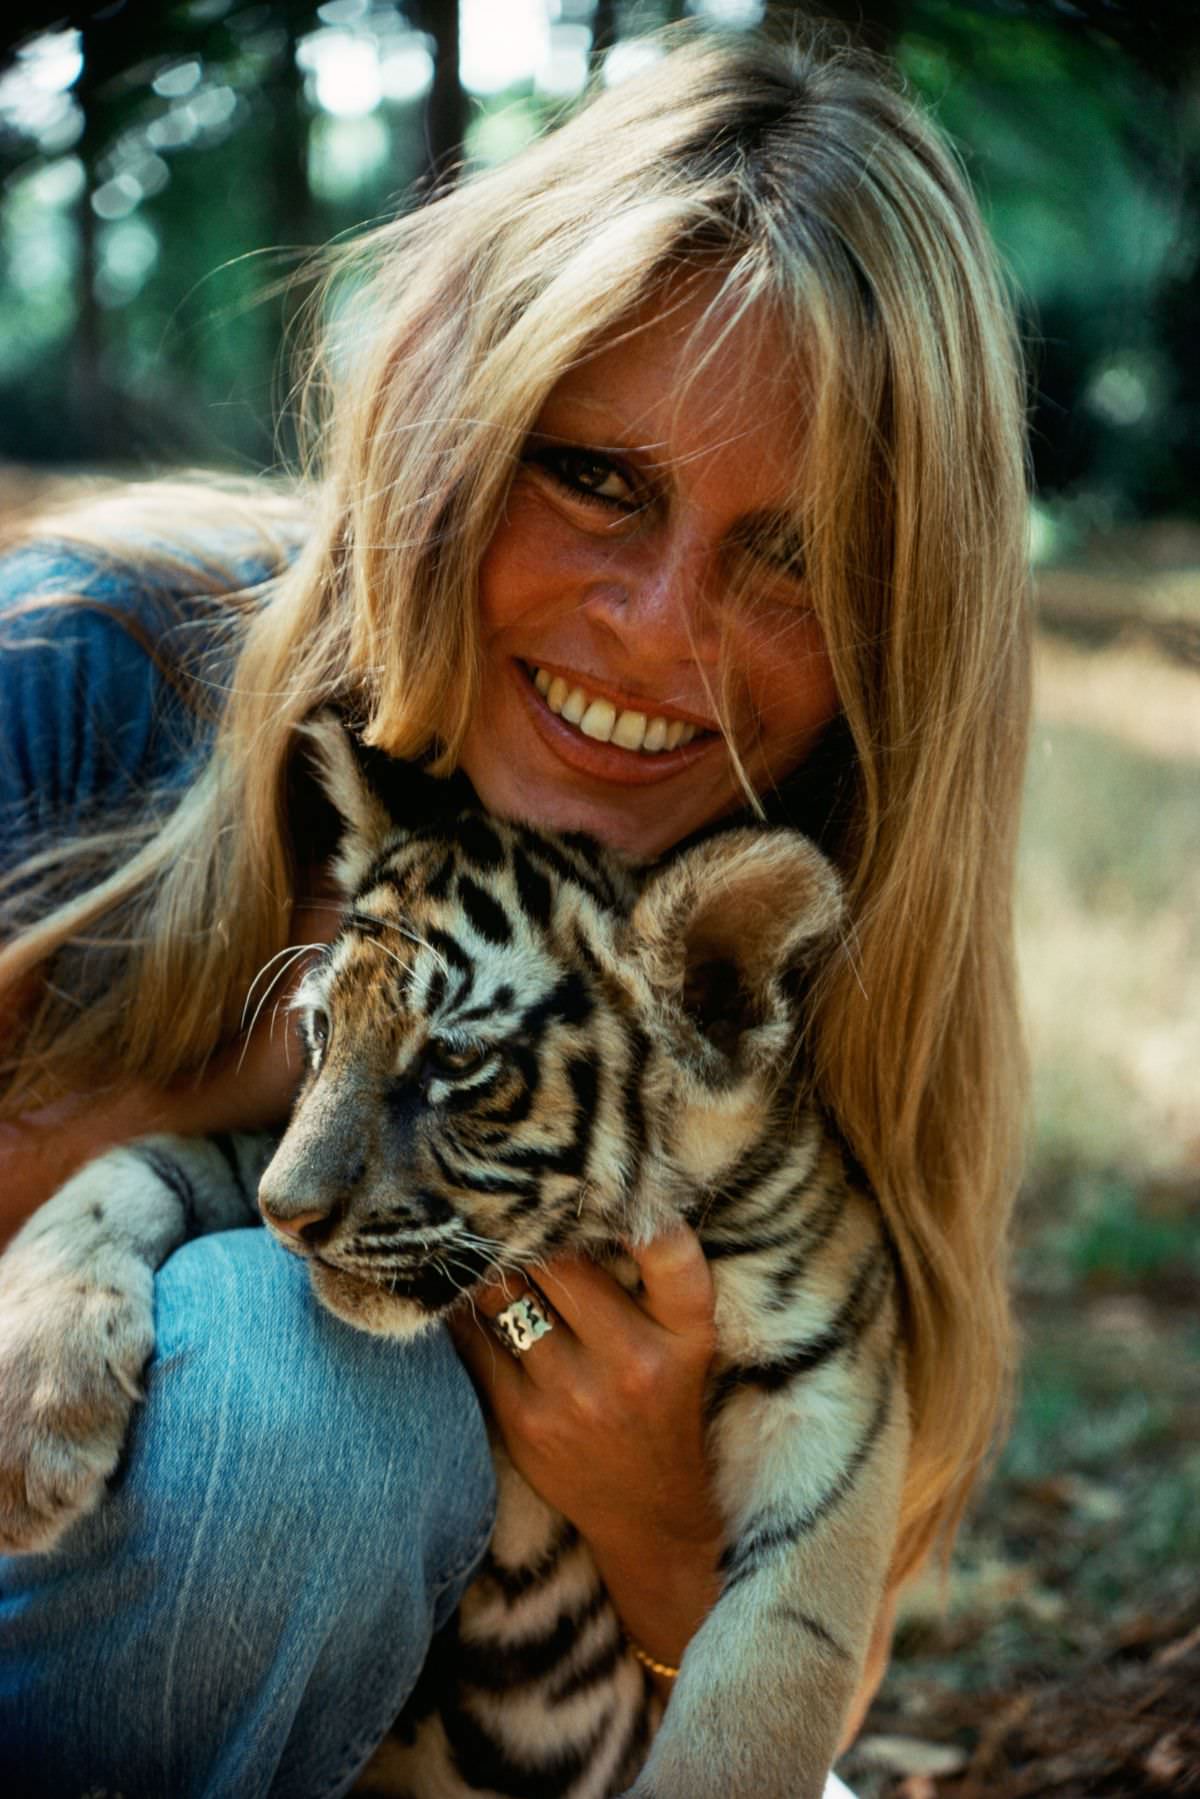 The French actress-singer Brigitte Bardot turned animal-rights activist cuddled with a tiger on a trip to Abidjan, Côte d'Ivoire, in 1976.